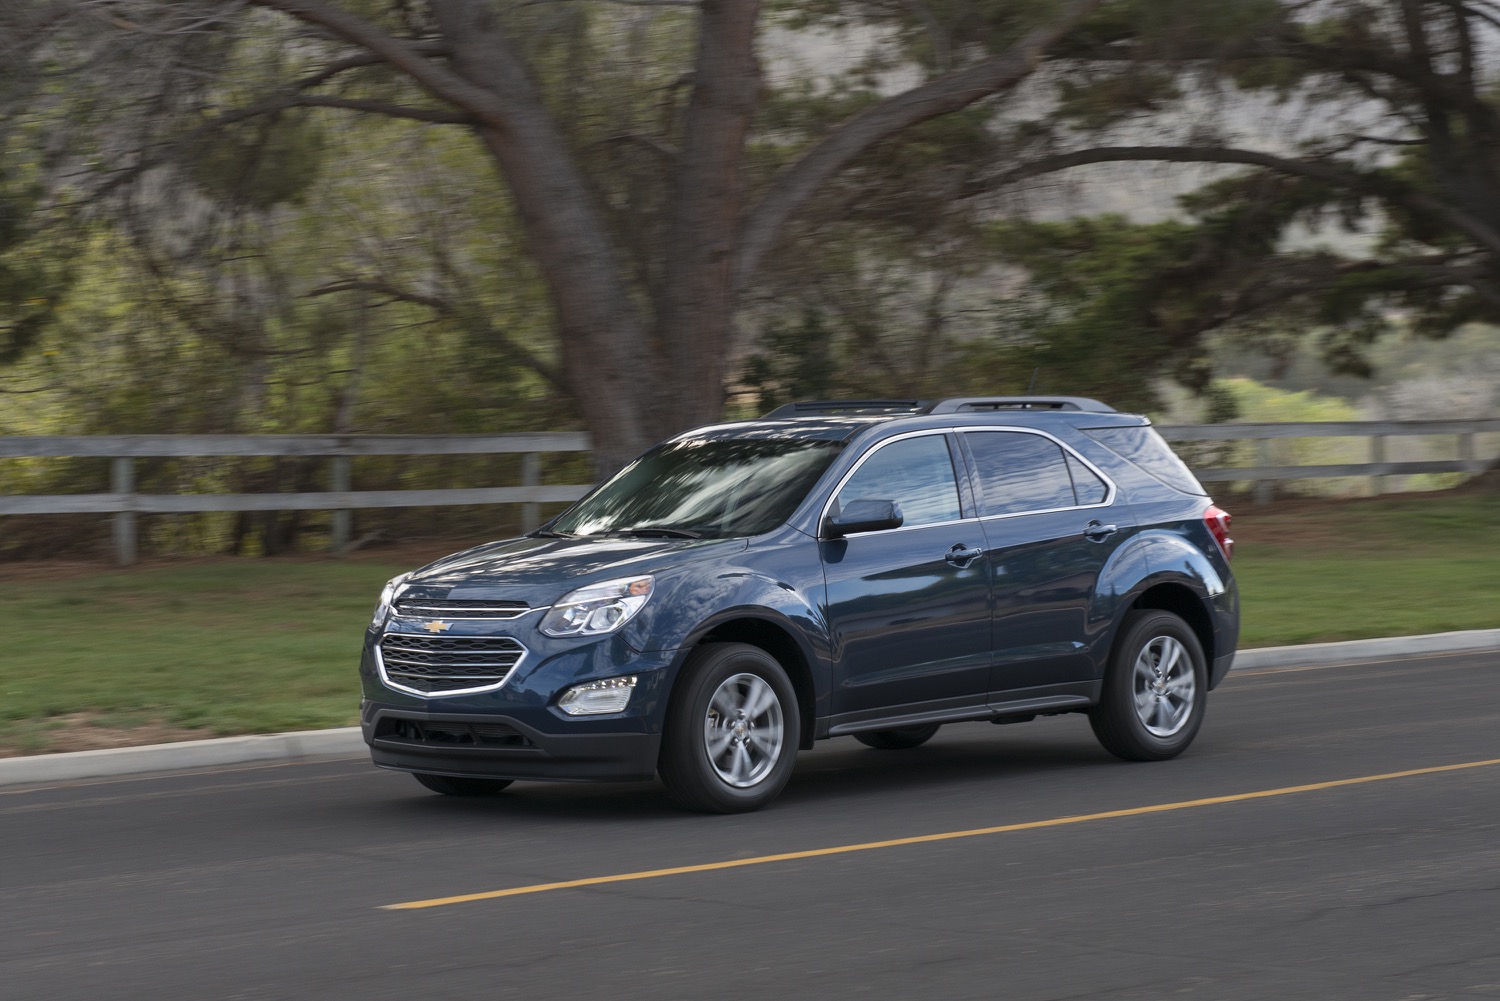 2017 Chevy Equinox Info Pictures Specs Wiki Gm Authority